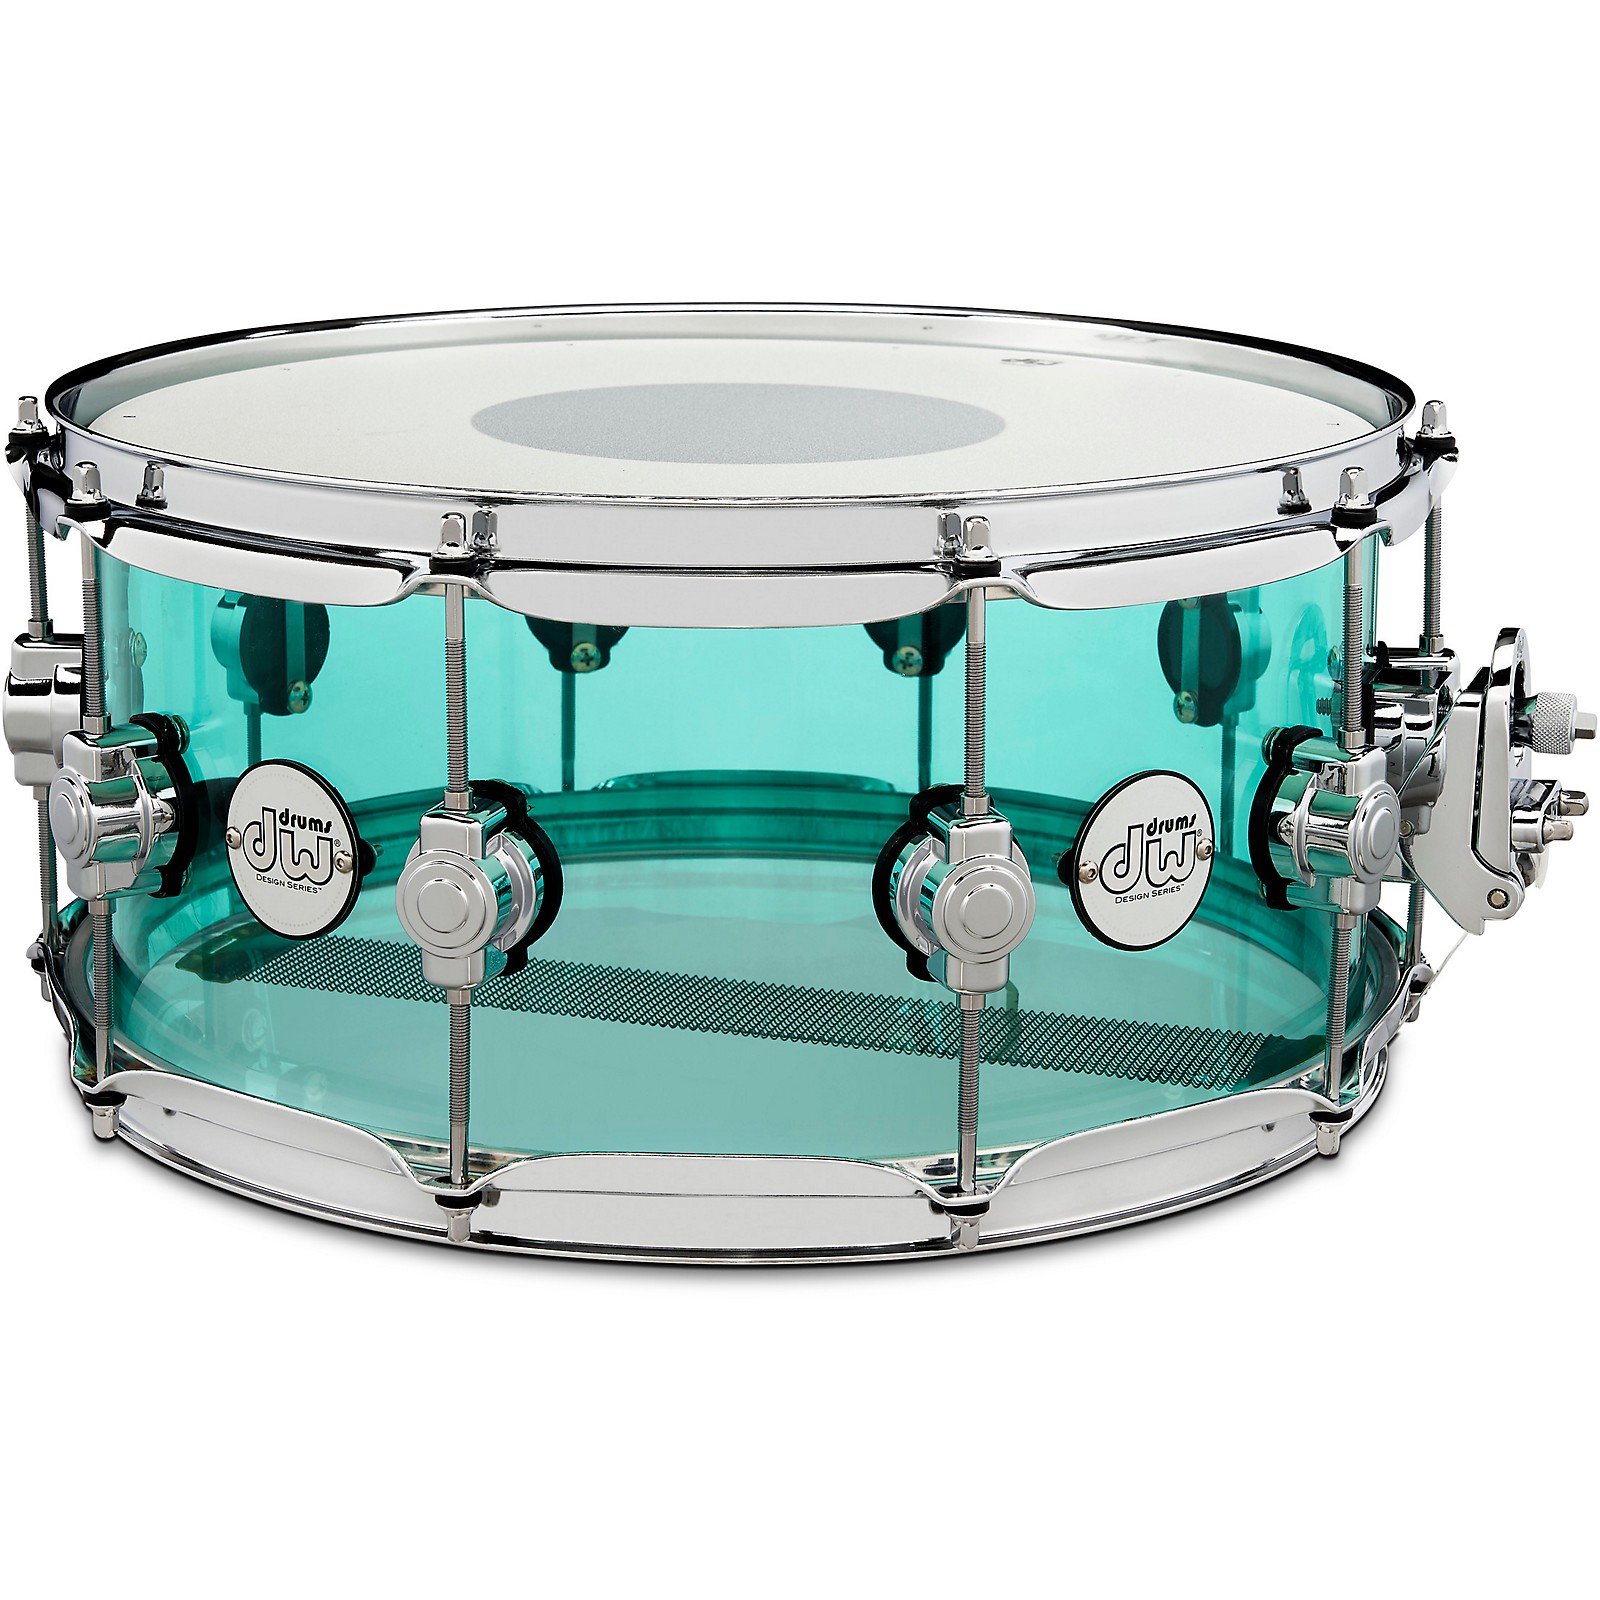 R161 DW ADD this DW DESIGN SERIES 14X6.5 SEA GLASS SNARE to YOUR DRUM SET TODAY 